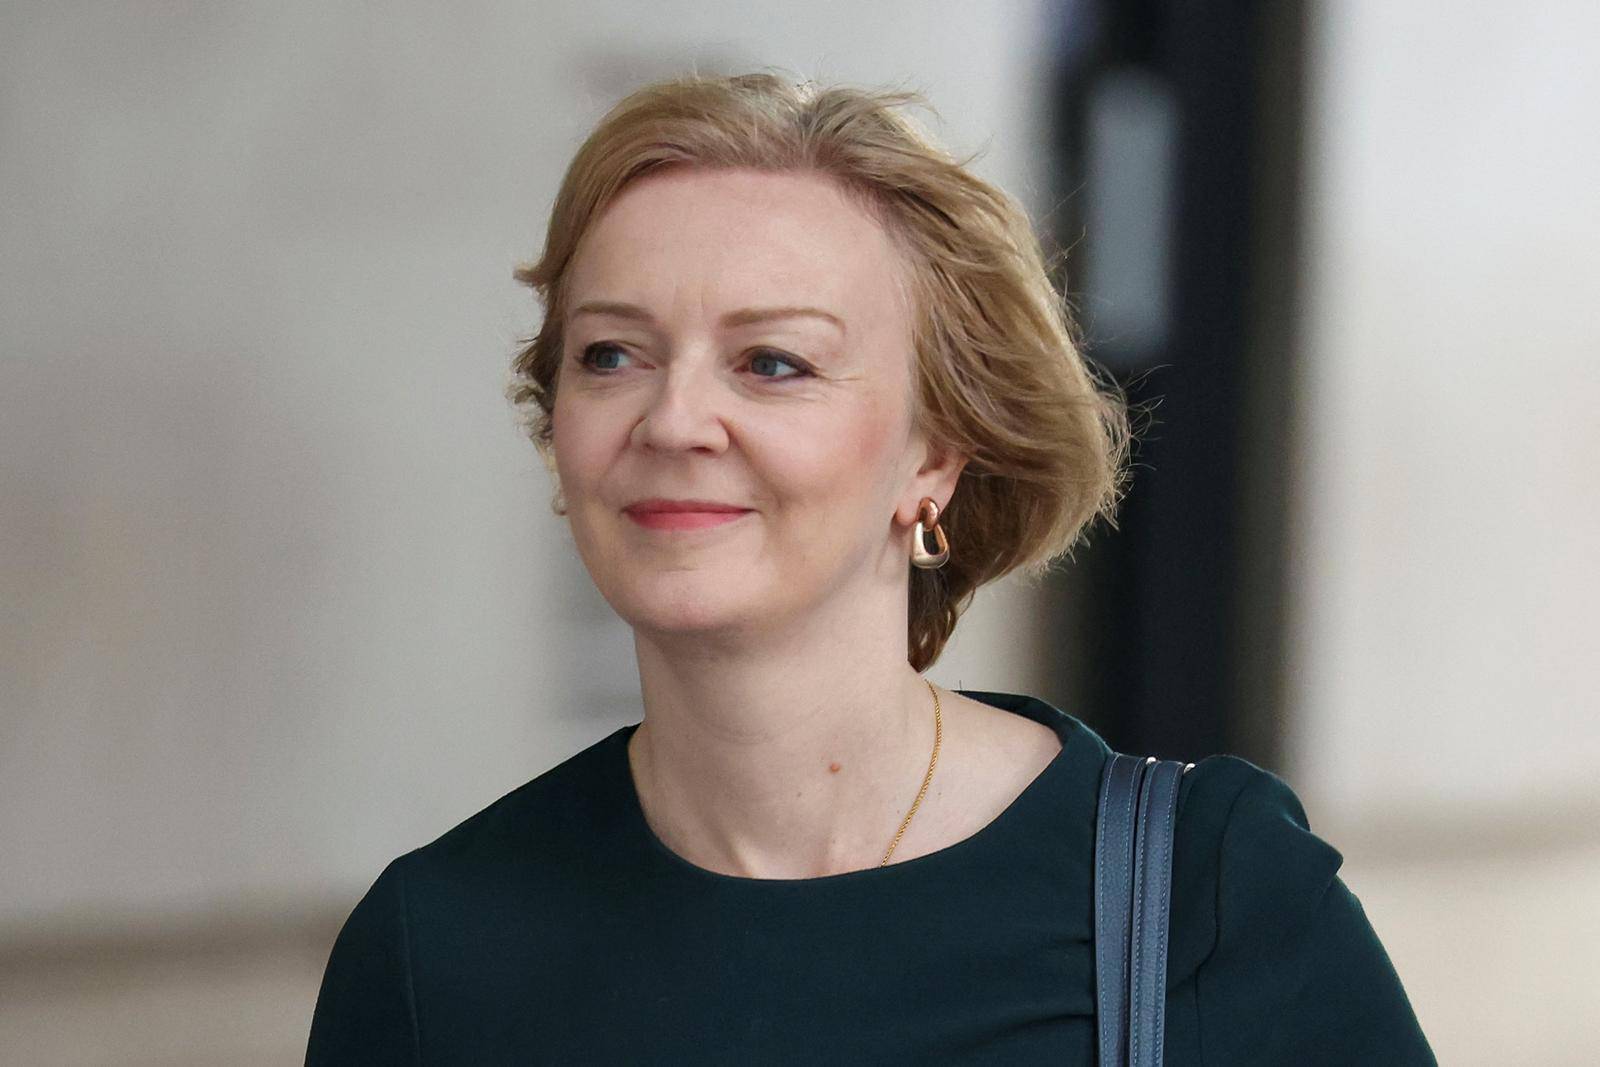 Conservative leadership candidate to appear on BBC's Sunday with Laura Kuenssberg show in London